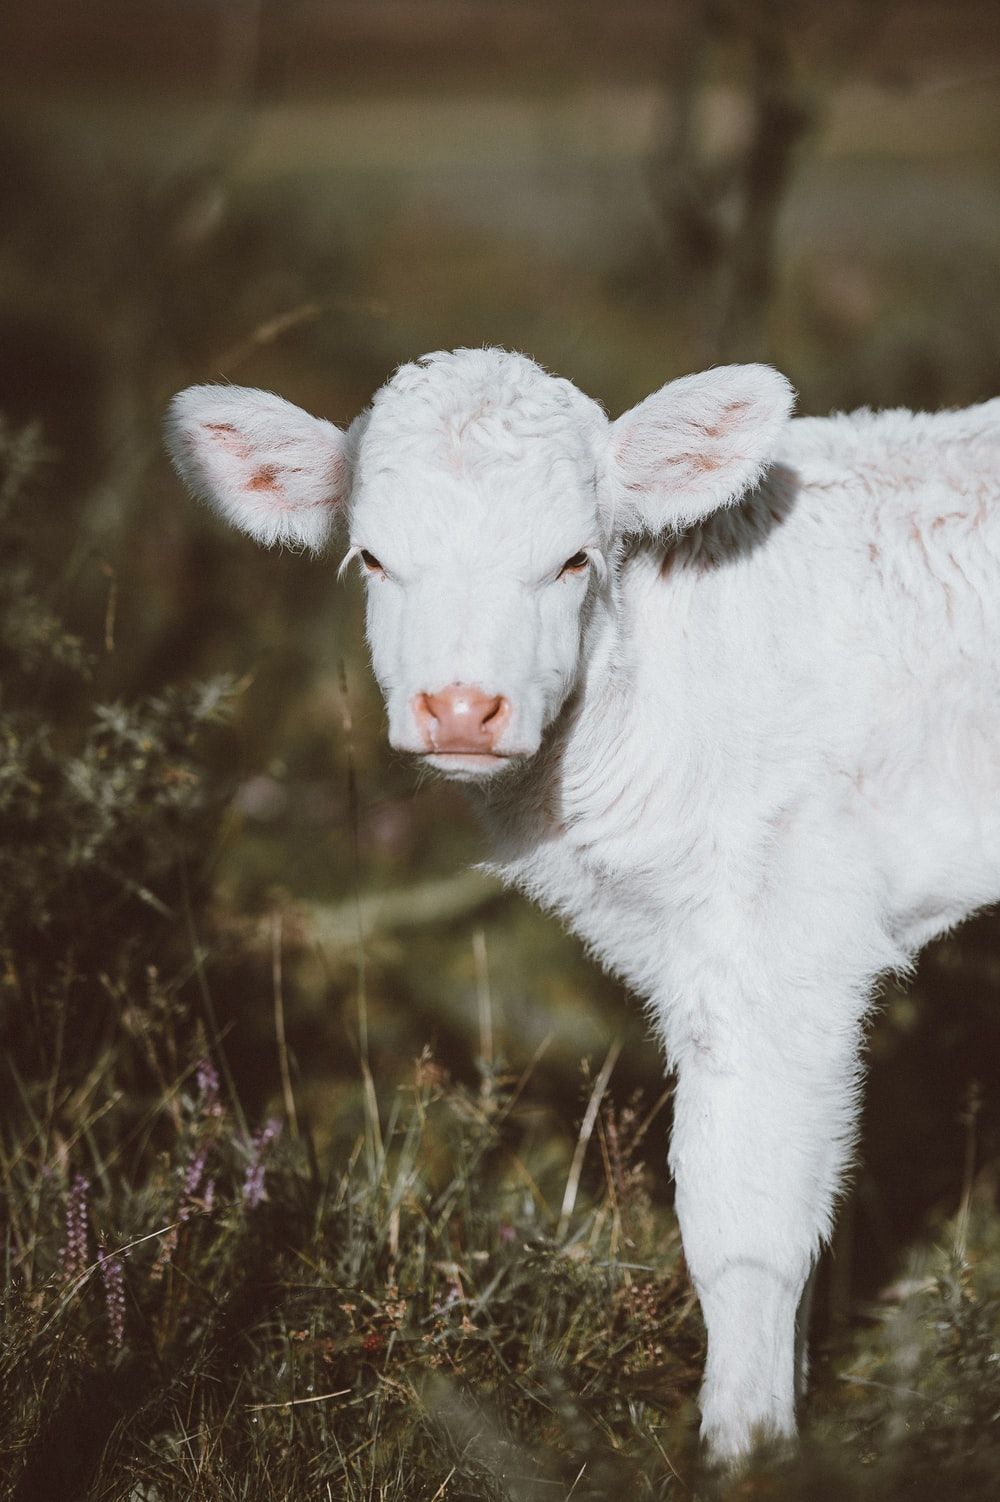 Baby Cow Picture. Download Free Image